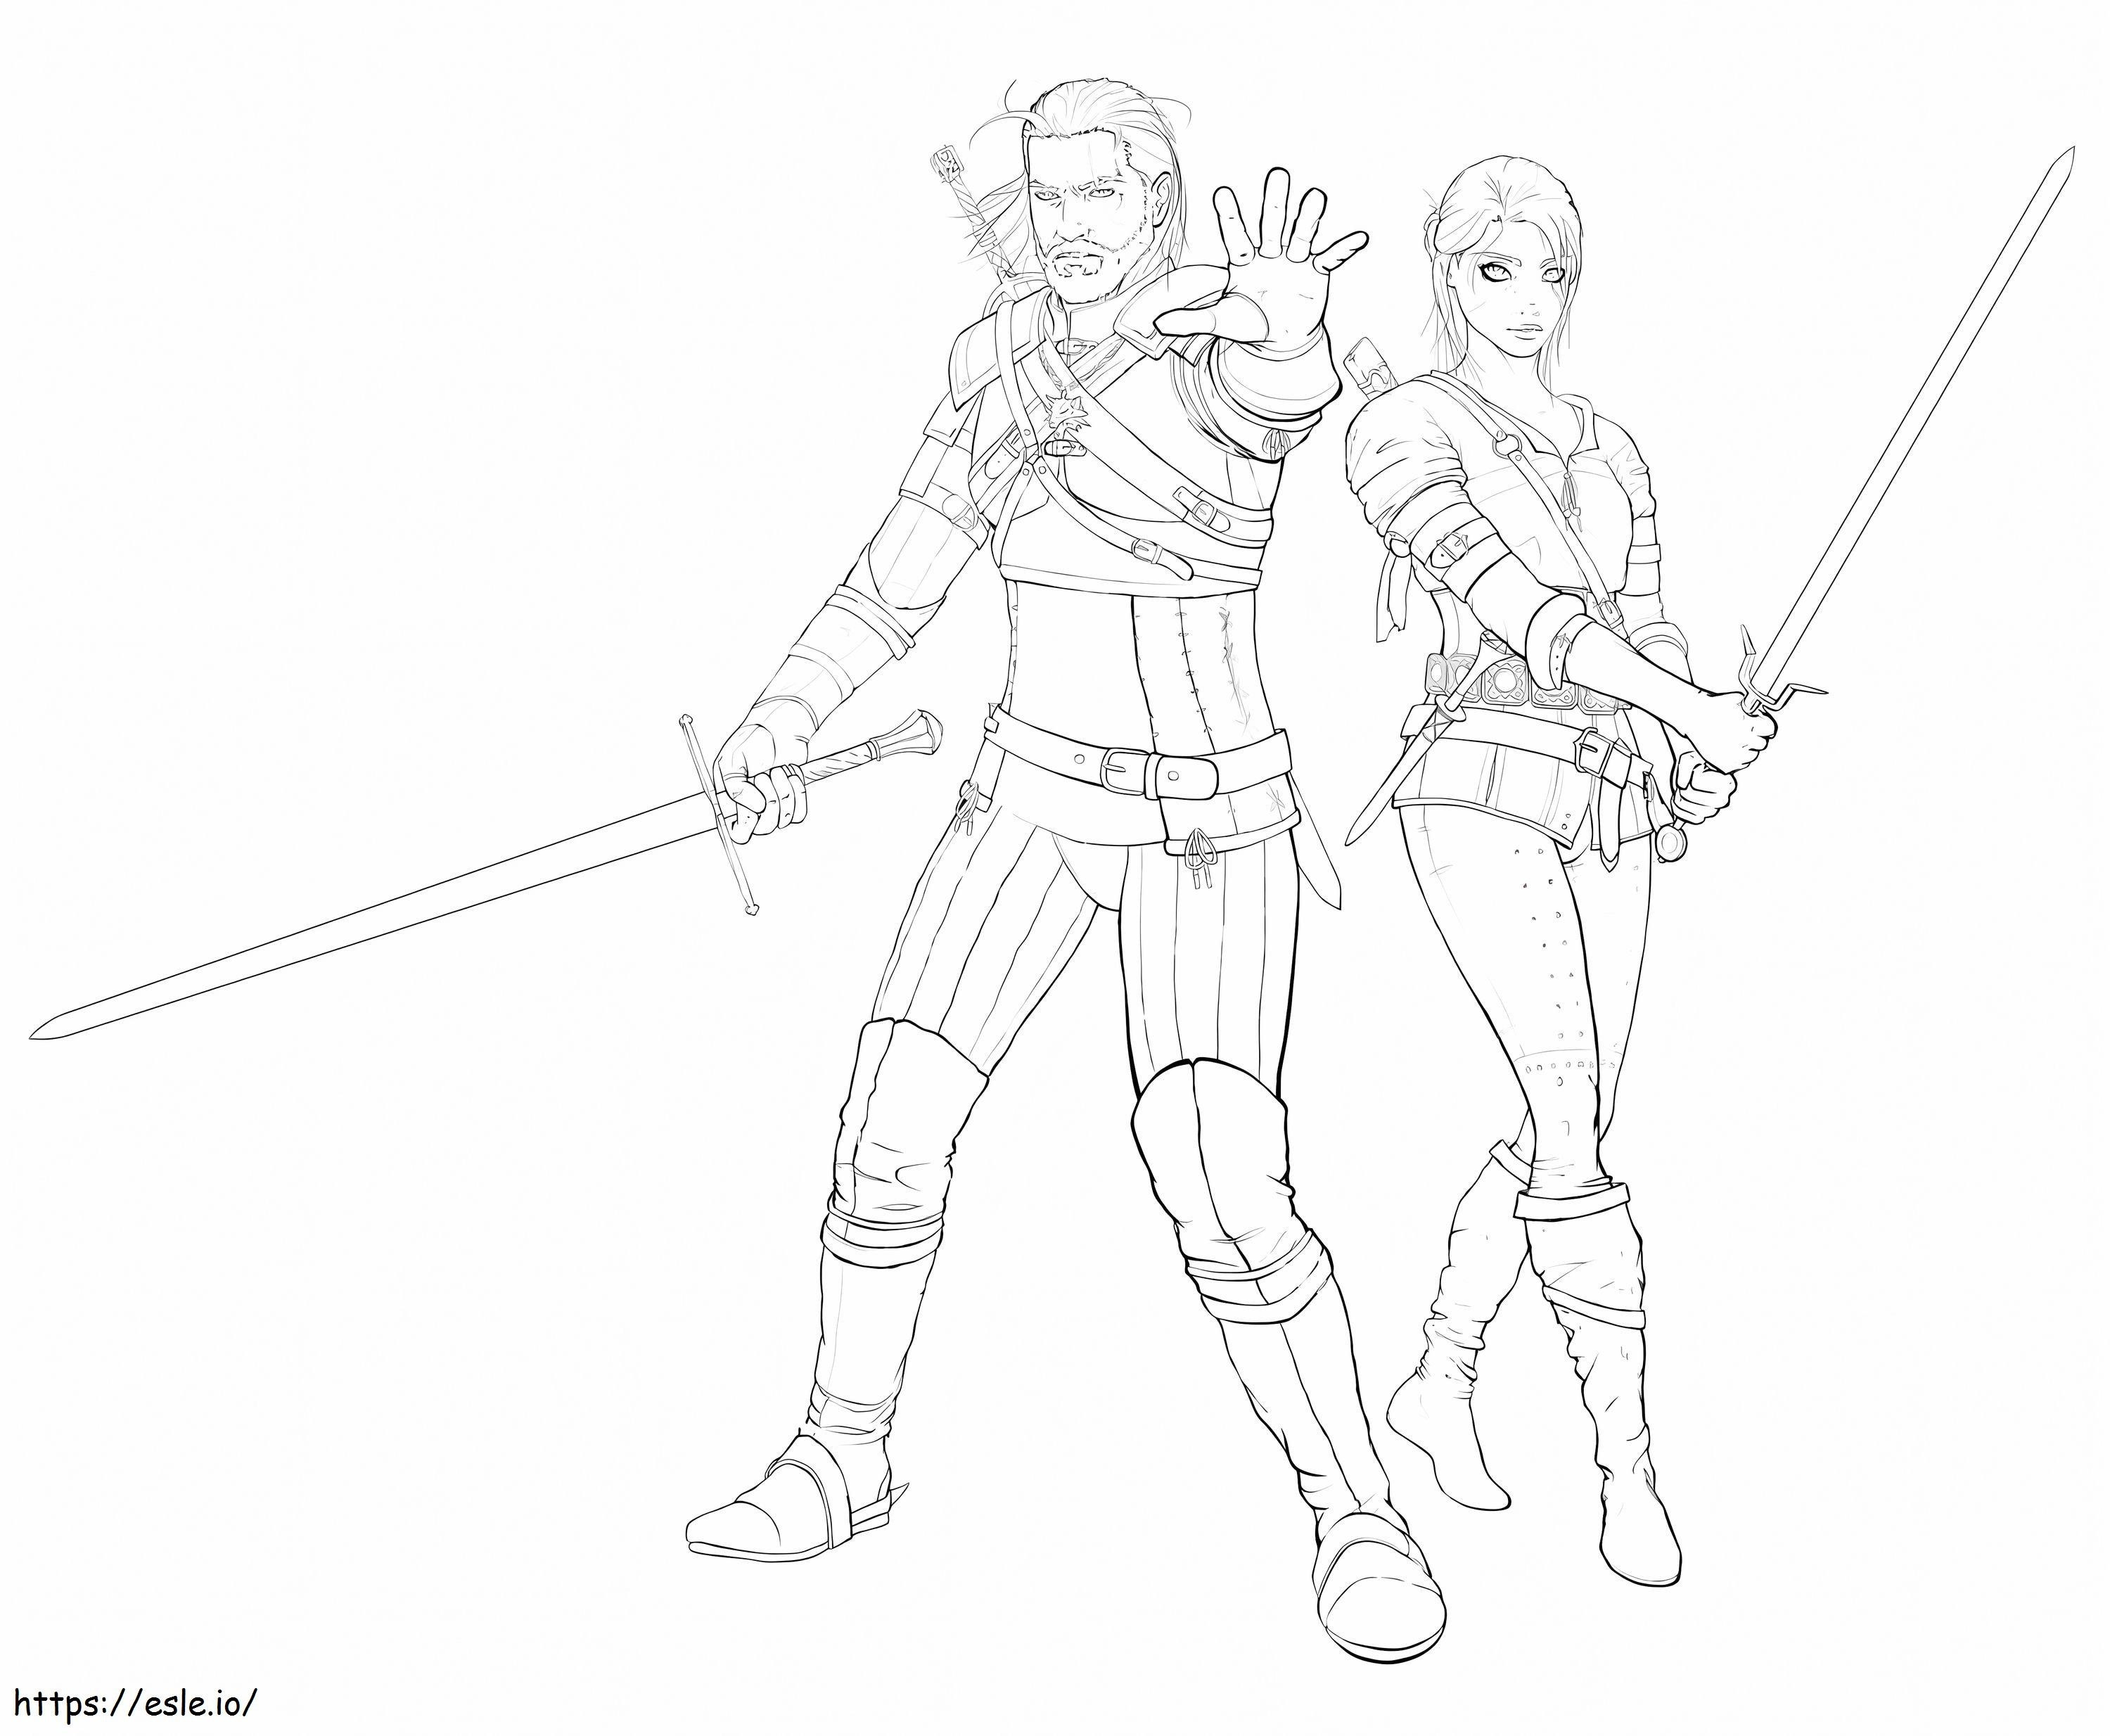 The Witcher Characters coloring page